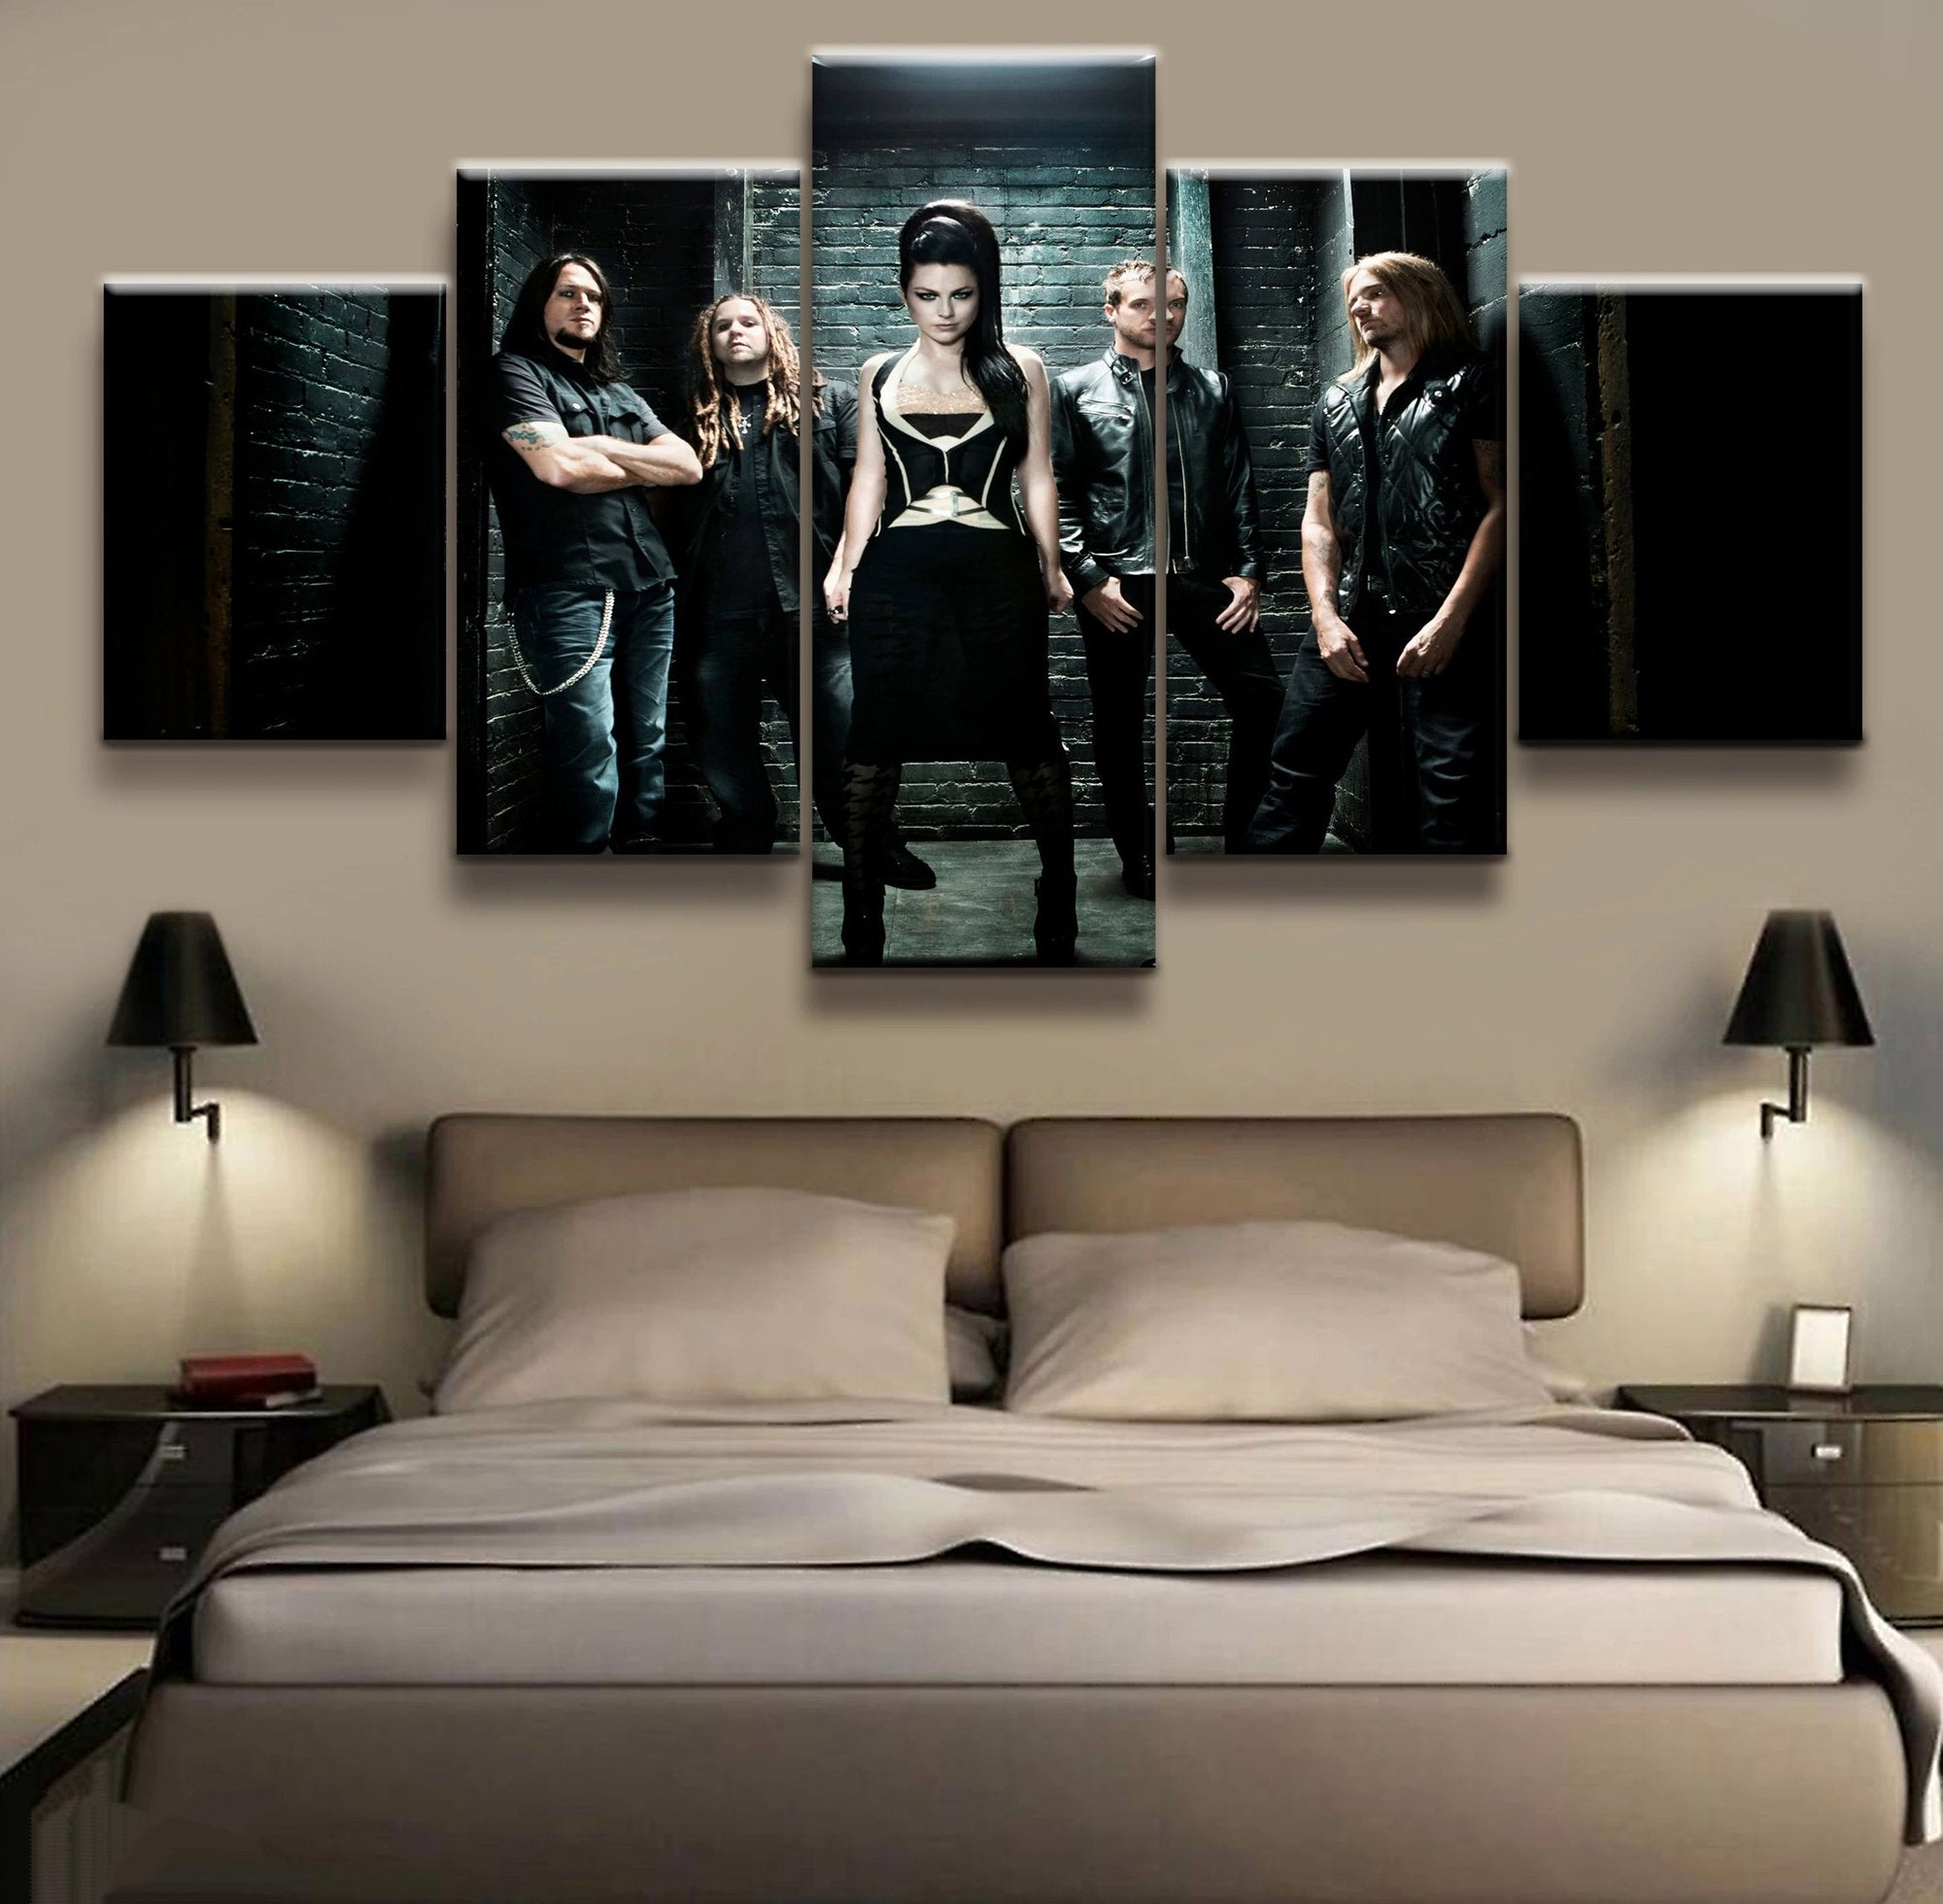 https://cdn.shopify.com/s/files/1/0387/9986/8044/products/Evanescence_Rock_Band.jpg